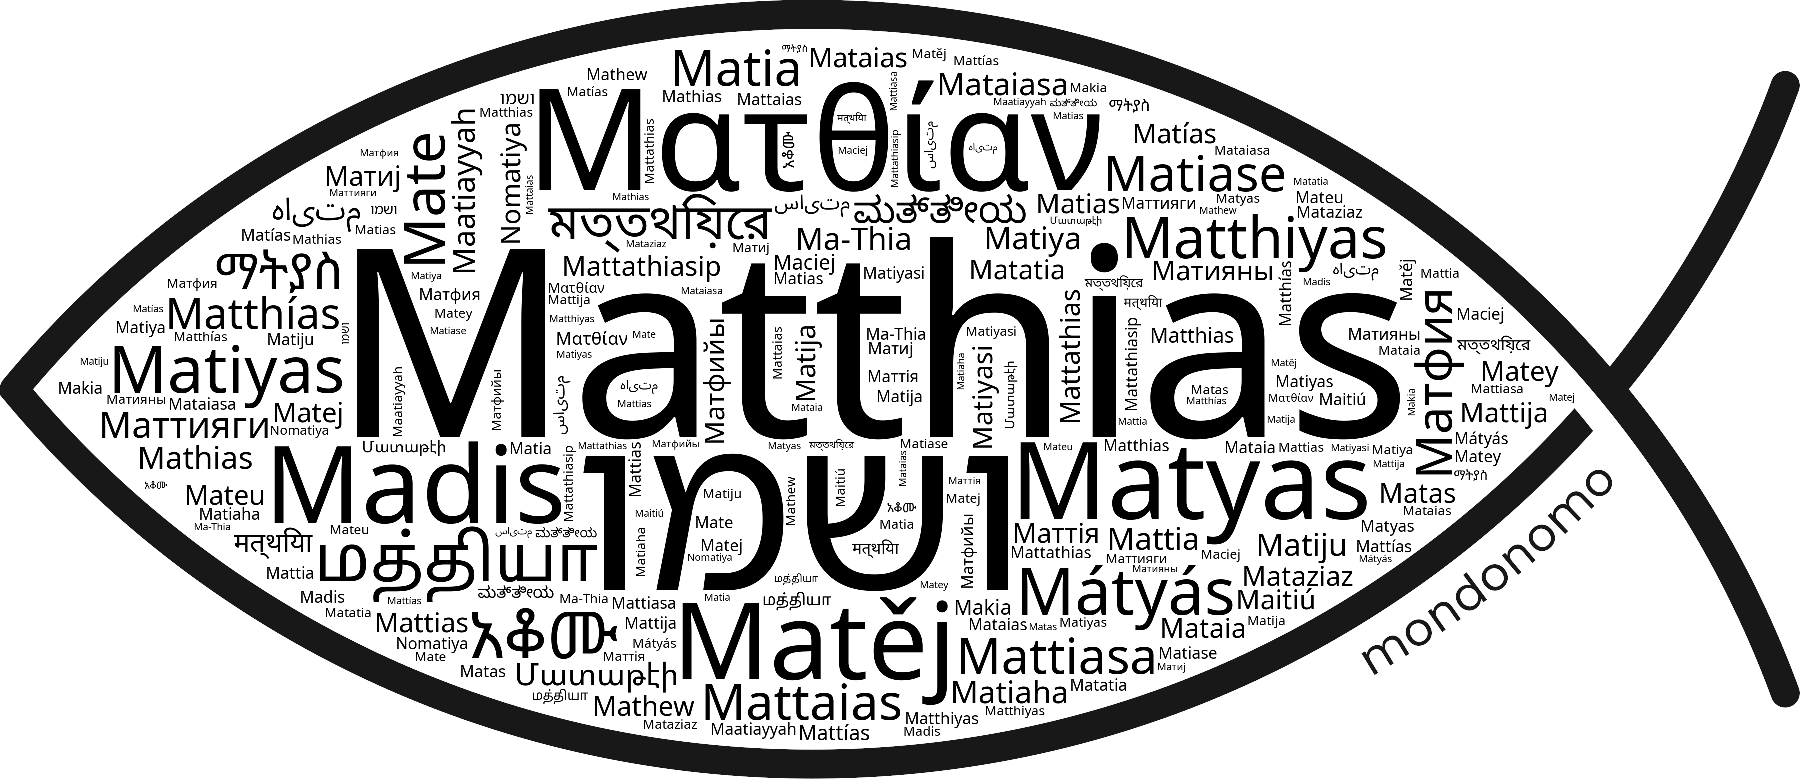 Name Matthias in the world's Bibles